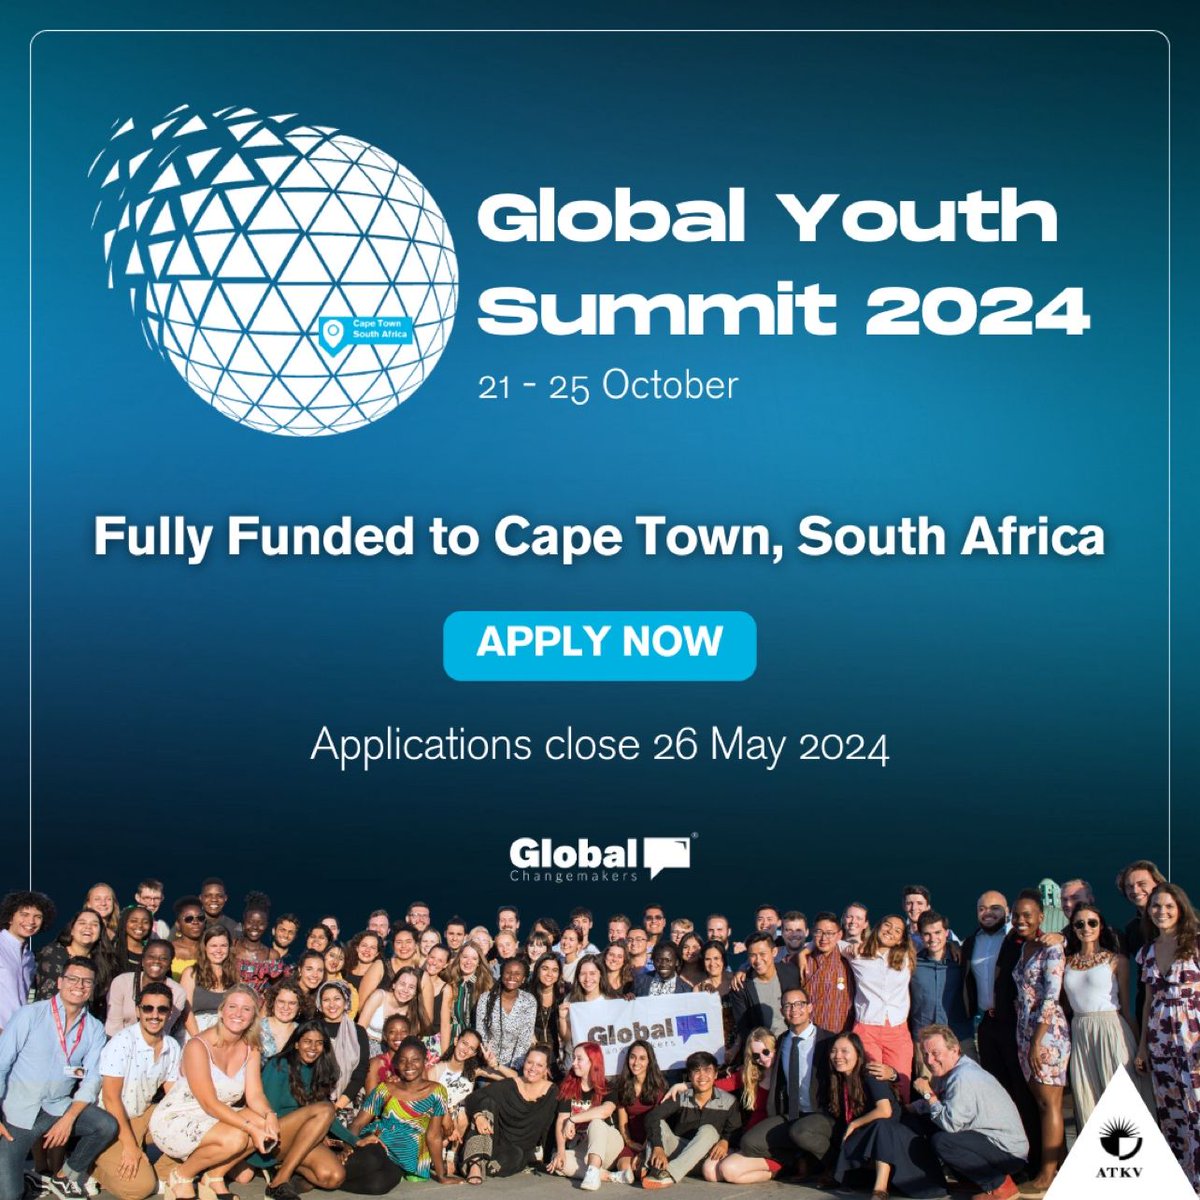 🌍✨ Apply now for the #FullyFunded Global Youth Summit 2024 in Cape Town, South Africa by Global Changemakers! Network with inspiring youth leaders, develop essential skills, and make a positive impact. Deadline: May 26 🚀 Link shorturl.at/NO012

 #GlobalYouthSummit